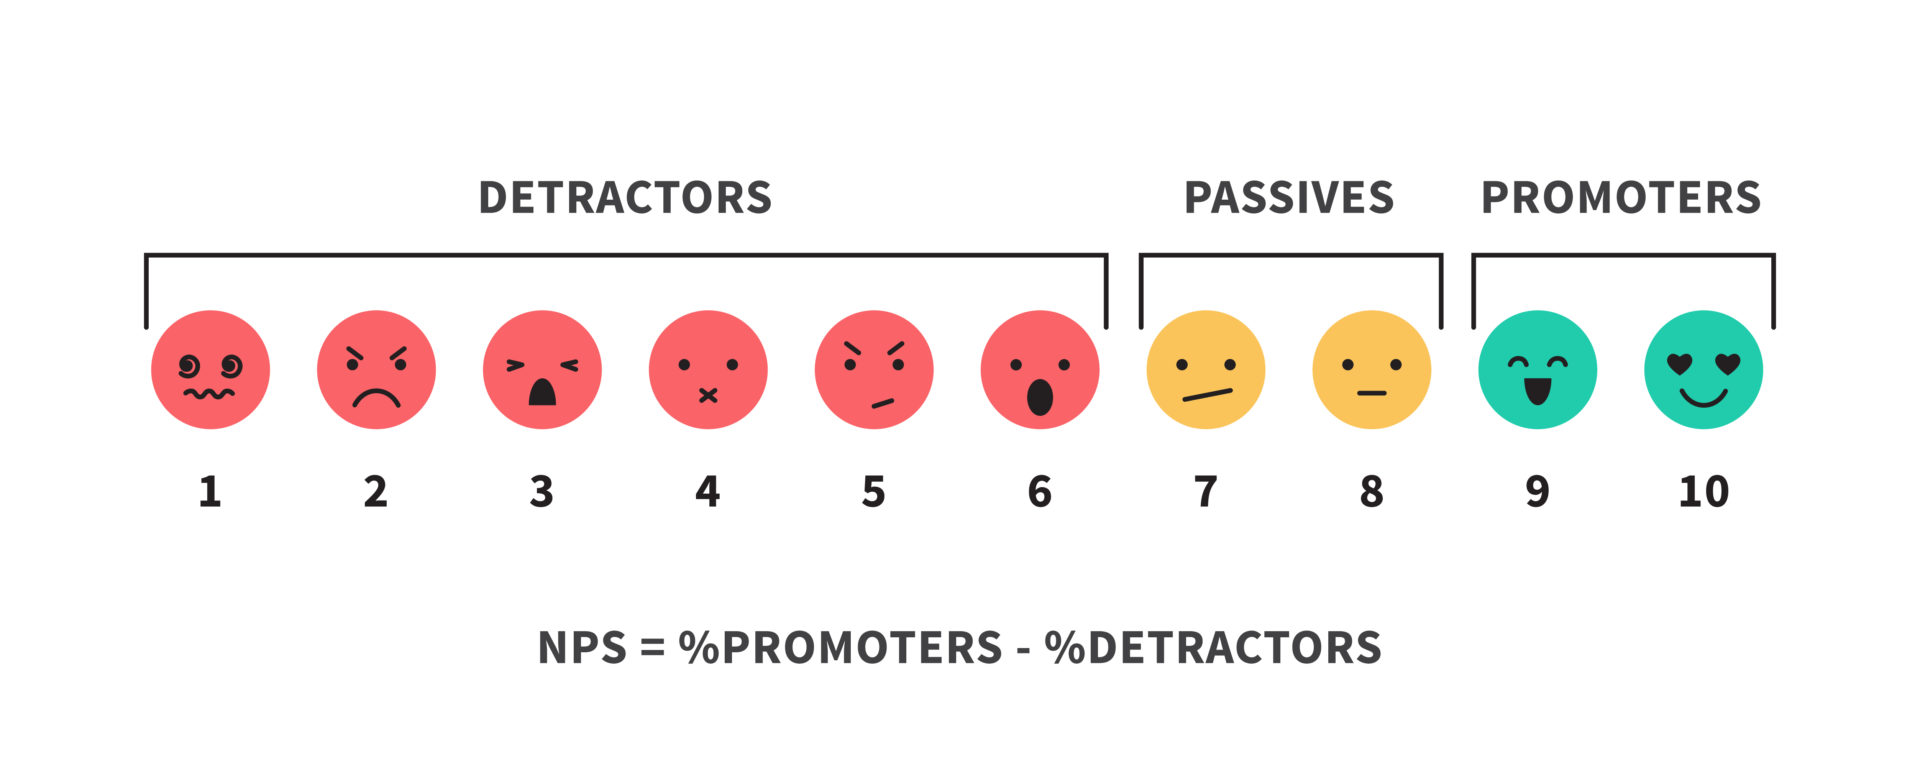 Net Promoter Score Scale images of an NPS scale 0-10 with red, yellow, and green faces making corresponding emotions